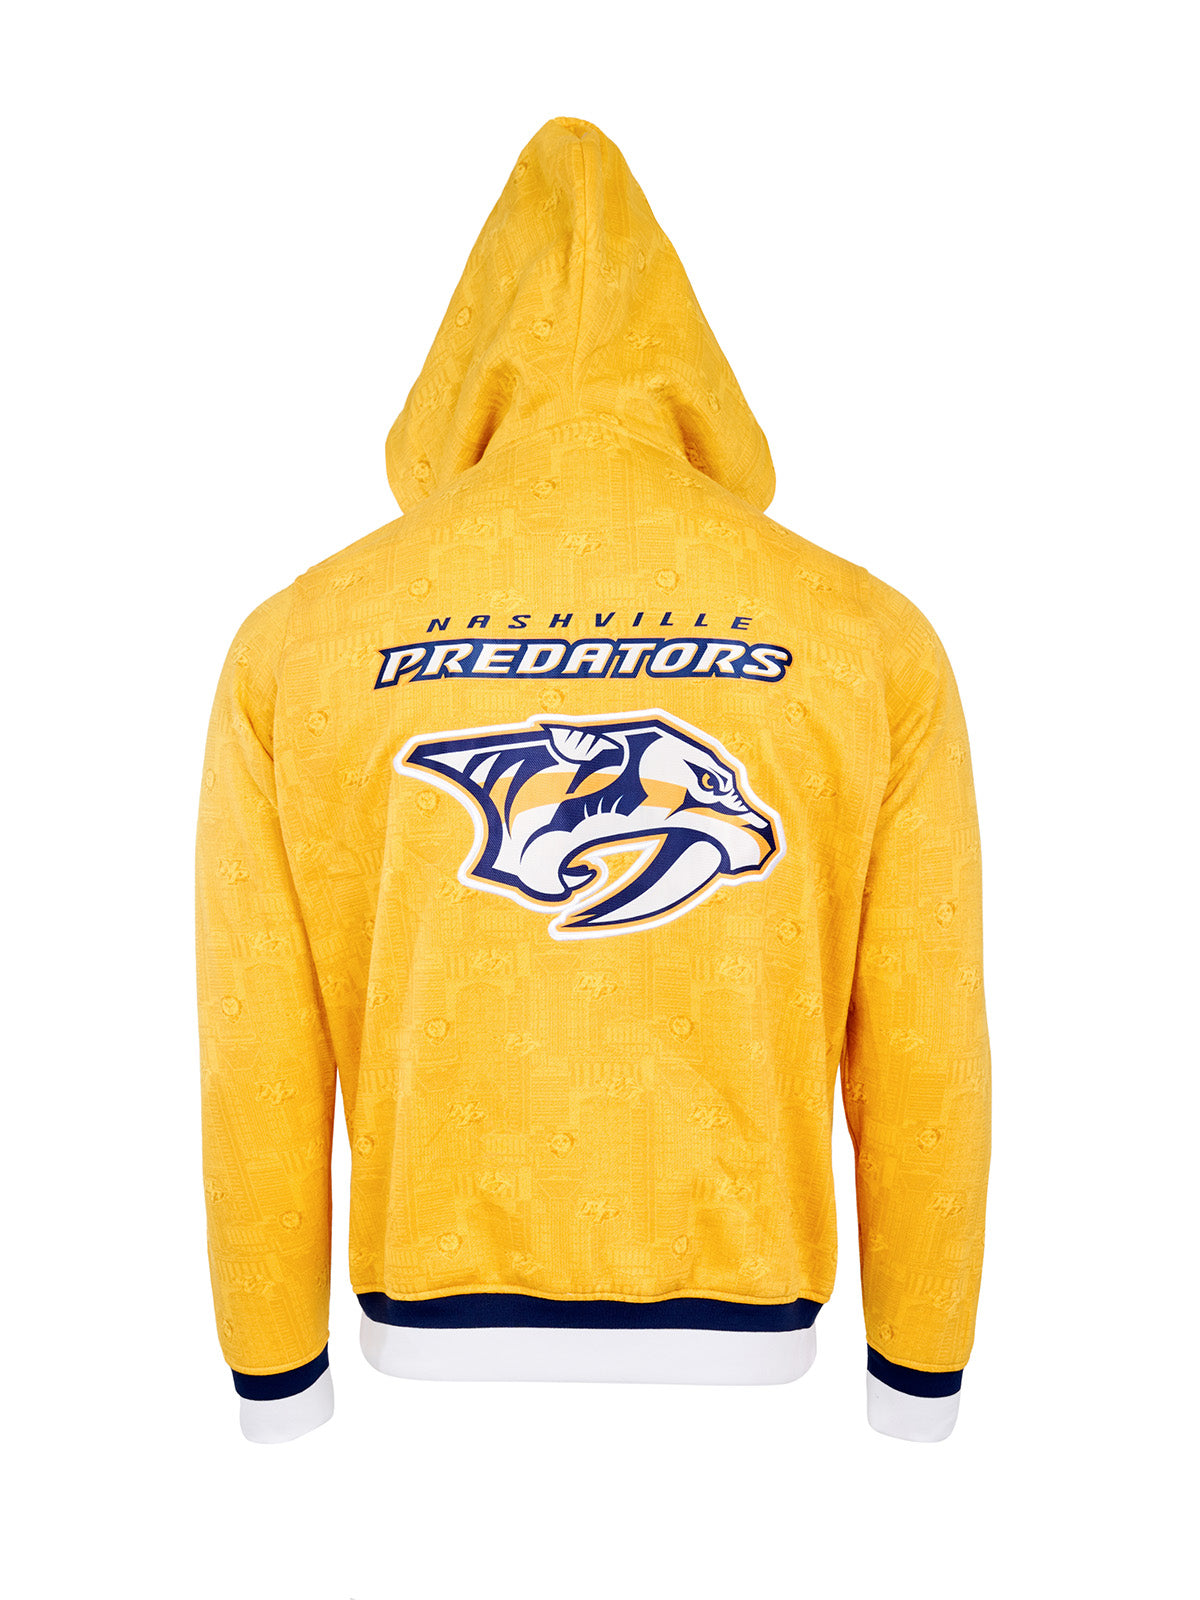 Nashville Predators Hoodie - Show your team spirit, with the iconic team logo patch centered on the back, and proudly display your Nashville Predators support in their team colors with this NHL hockey hoodie.